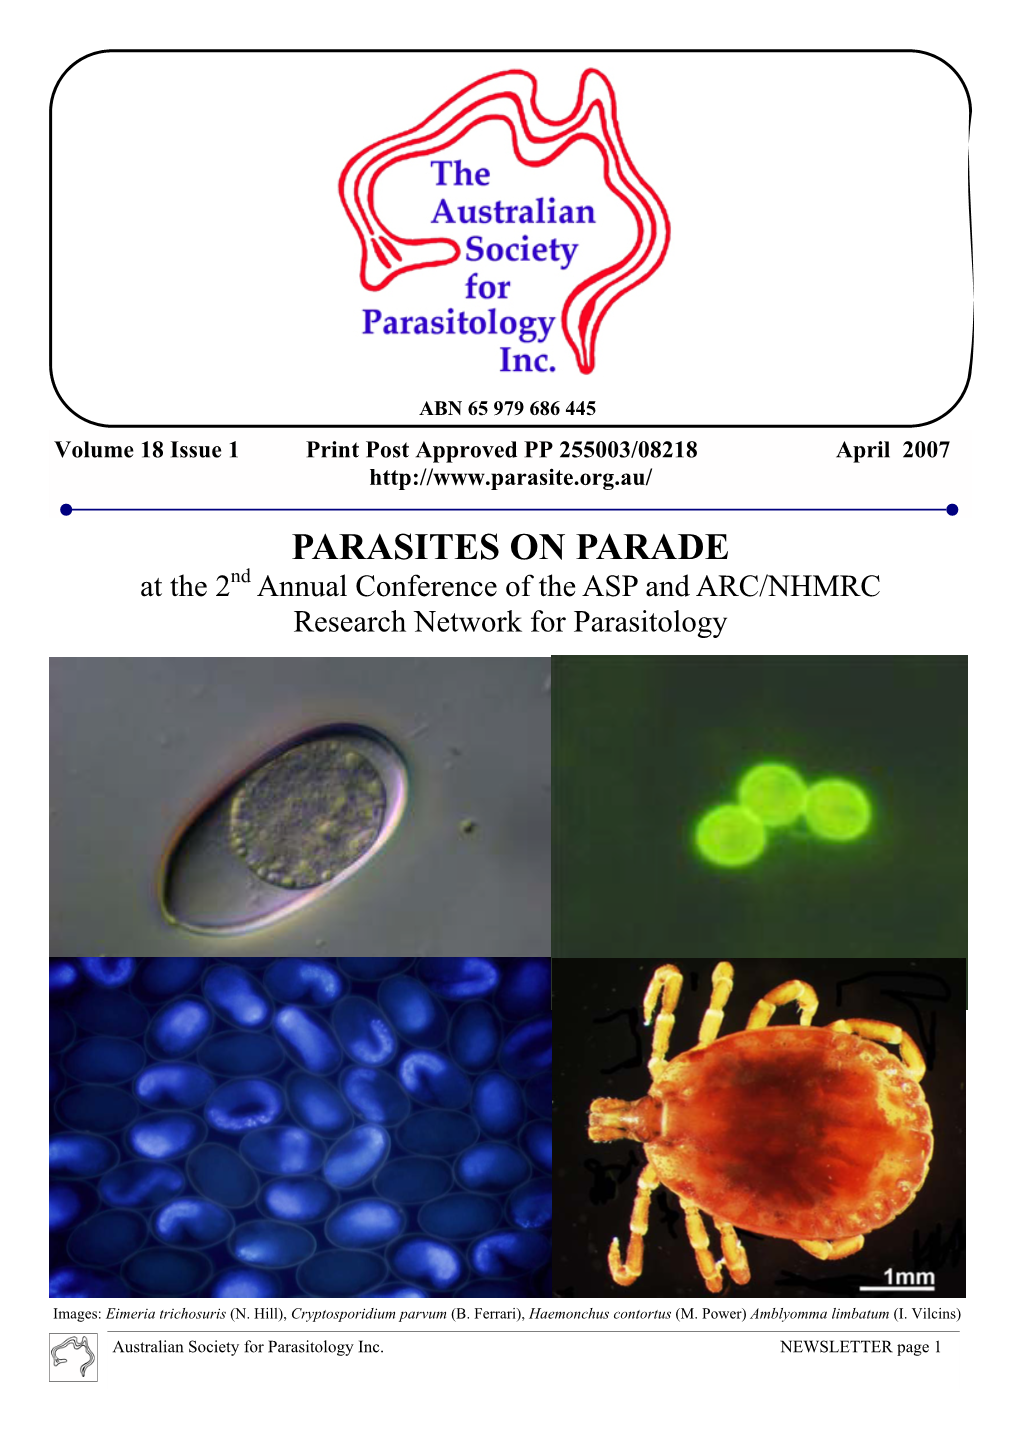 PARASITES on PARADE at the 2Nd Annual Conference of the ASP and ARC/NHMRC Research Network for Parasitology